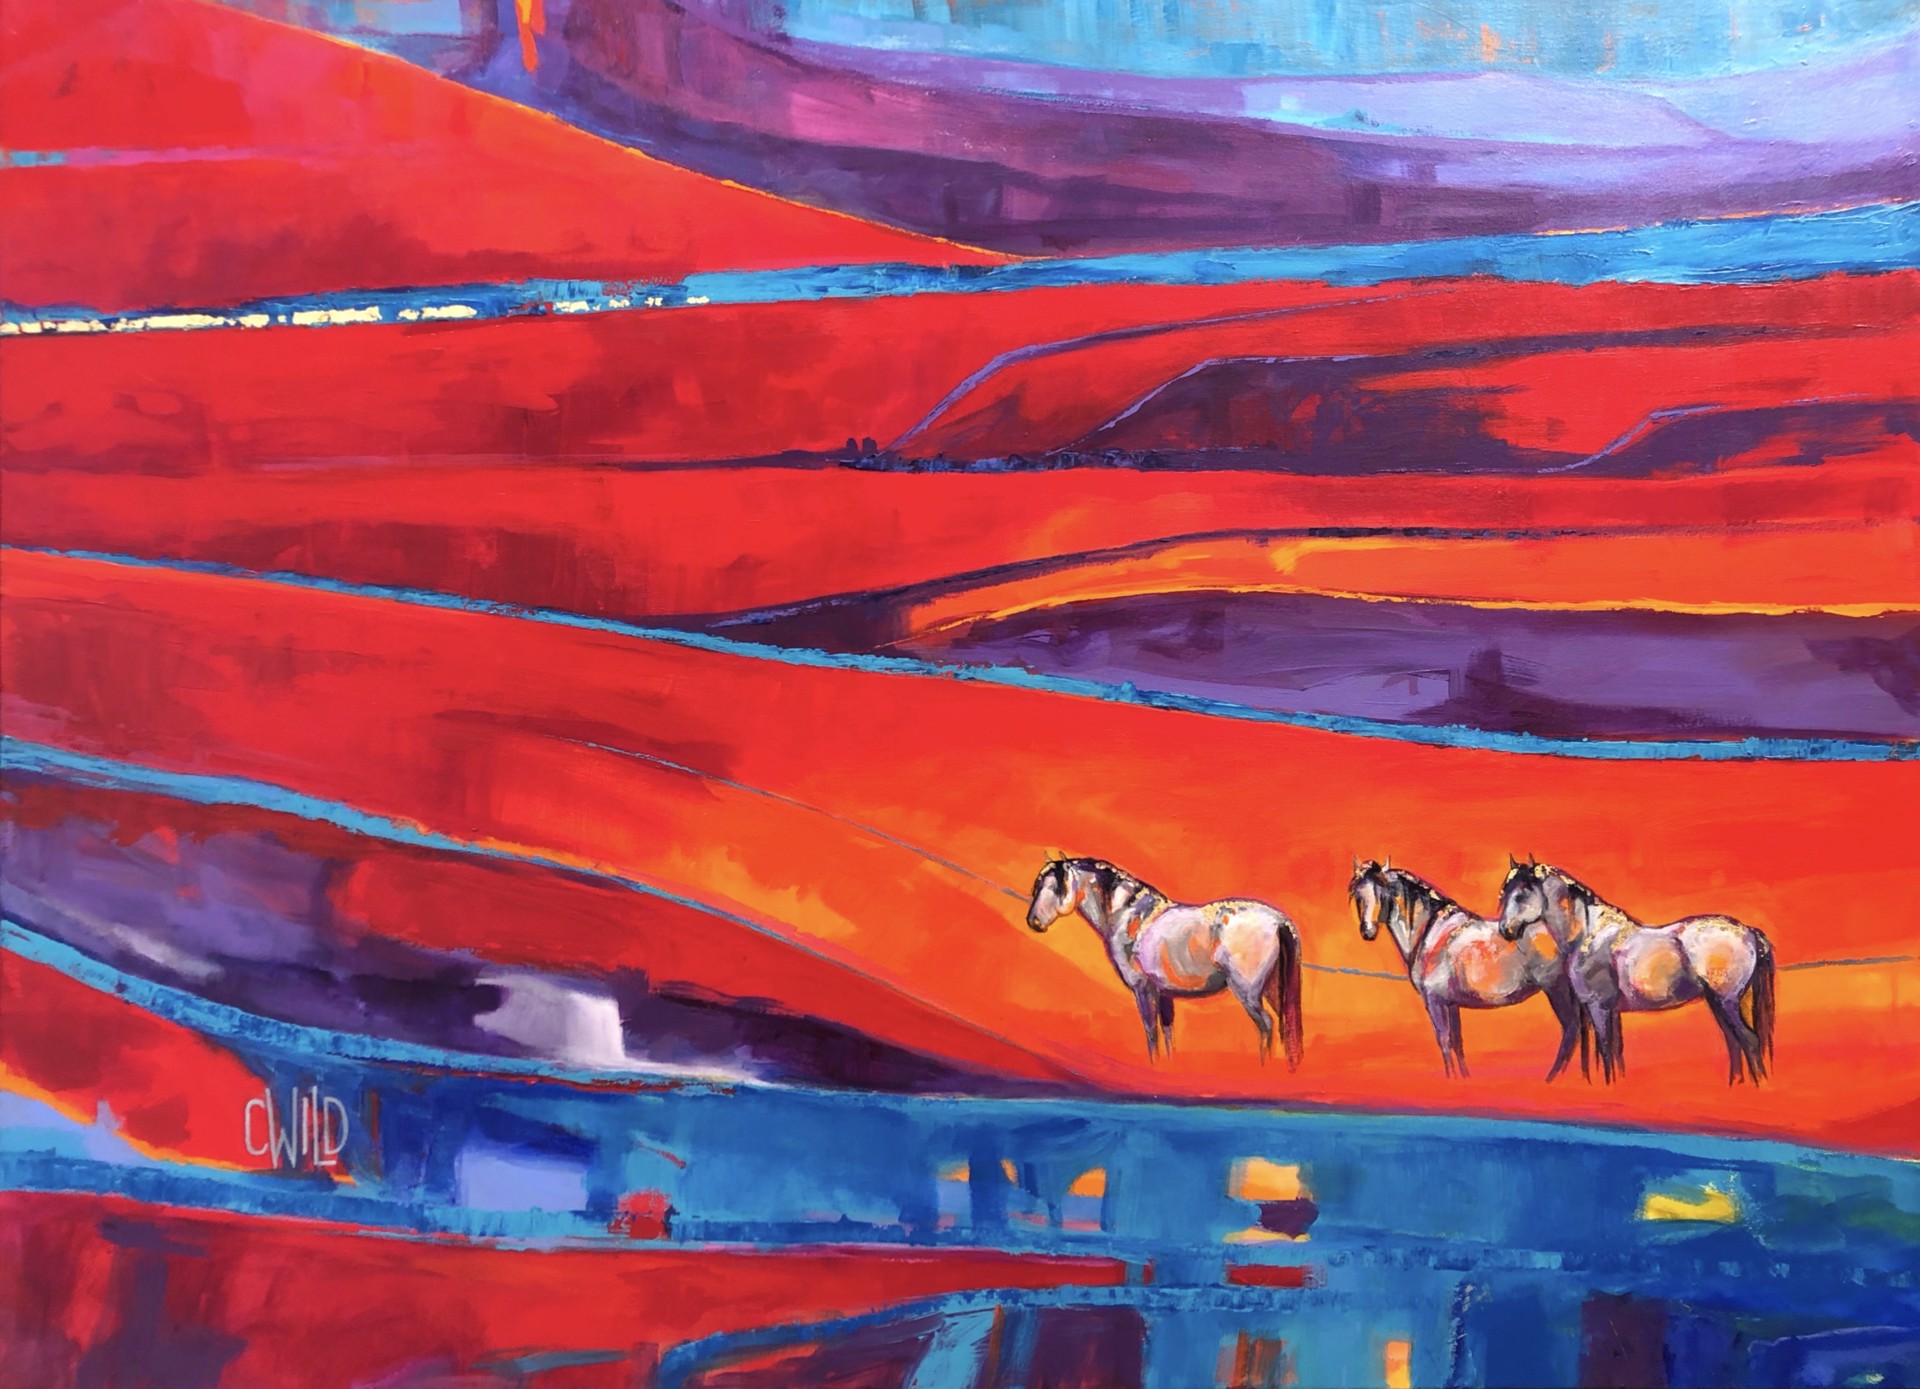 Colorful Acrylic And Gold Leaf Painting Consisting Of Wild Grey Horses With Red Blue And Purple Hills As The Landscape By Carrie Wild Available At Gallery Wild